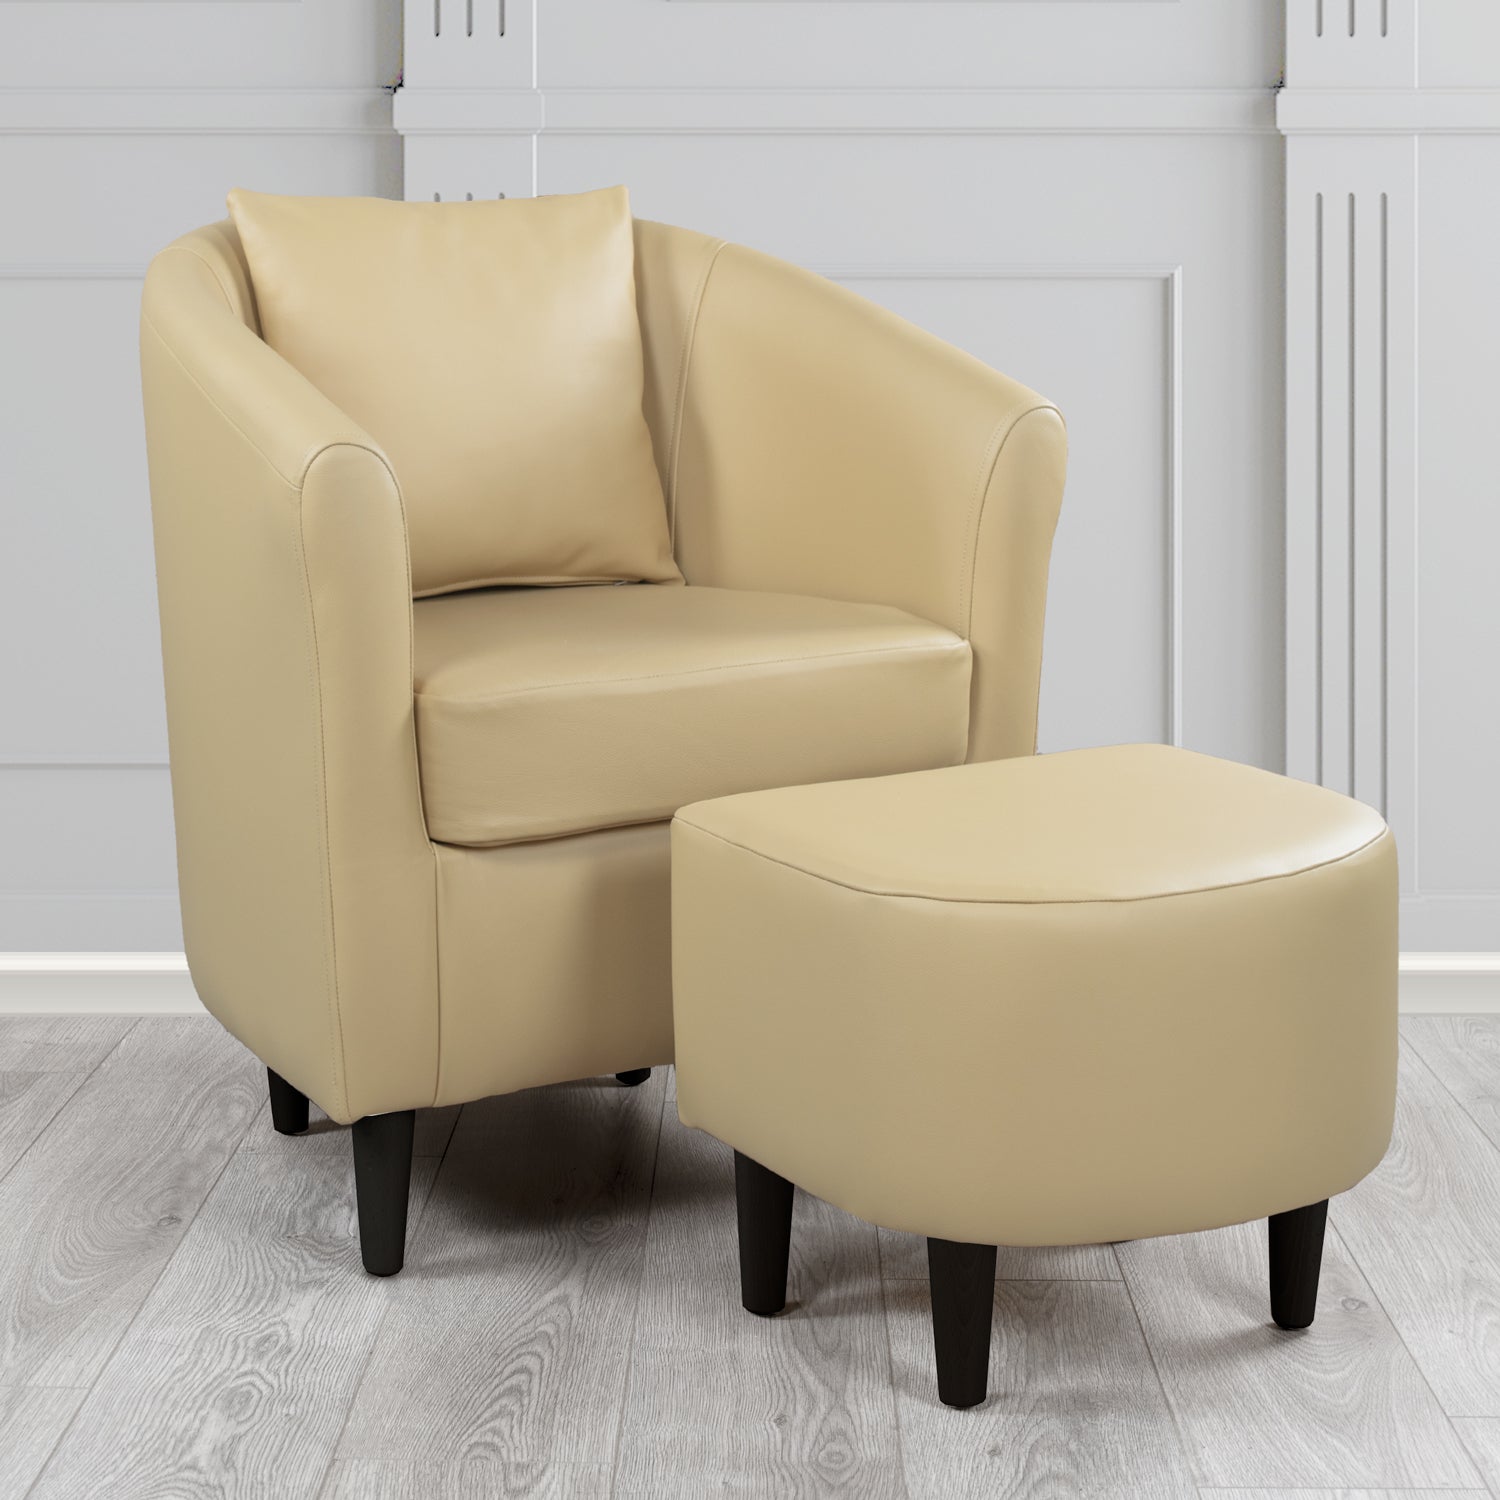 St Tropez Shelly Basket Crib 5 Genuine Leather Tub Chair & Footstool Set With Scatter Cushion (6619464859690)